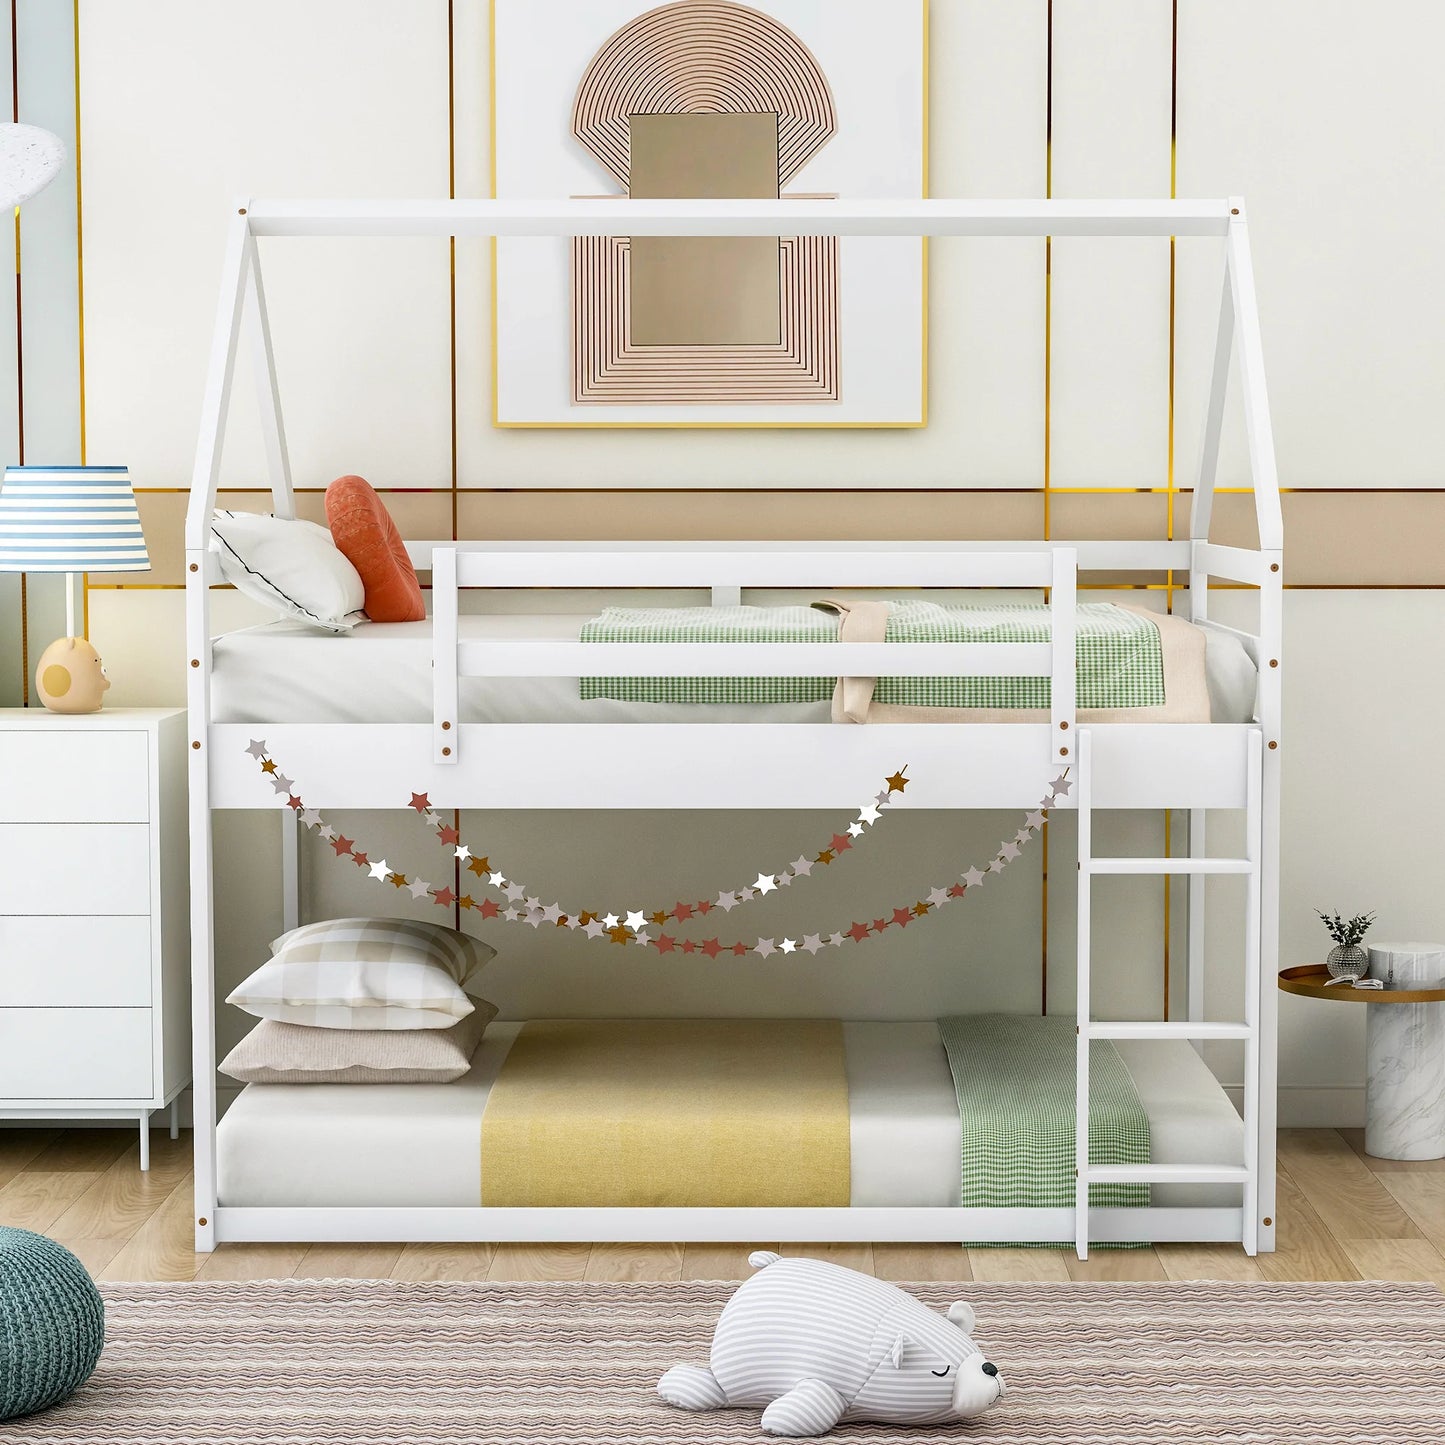 Low Bunk Bed Twin Size in White